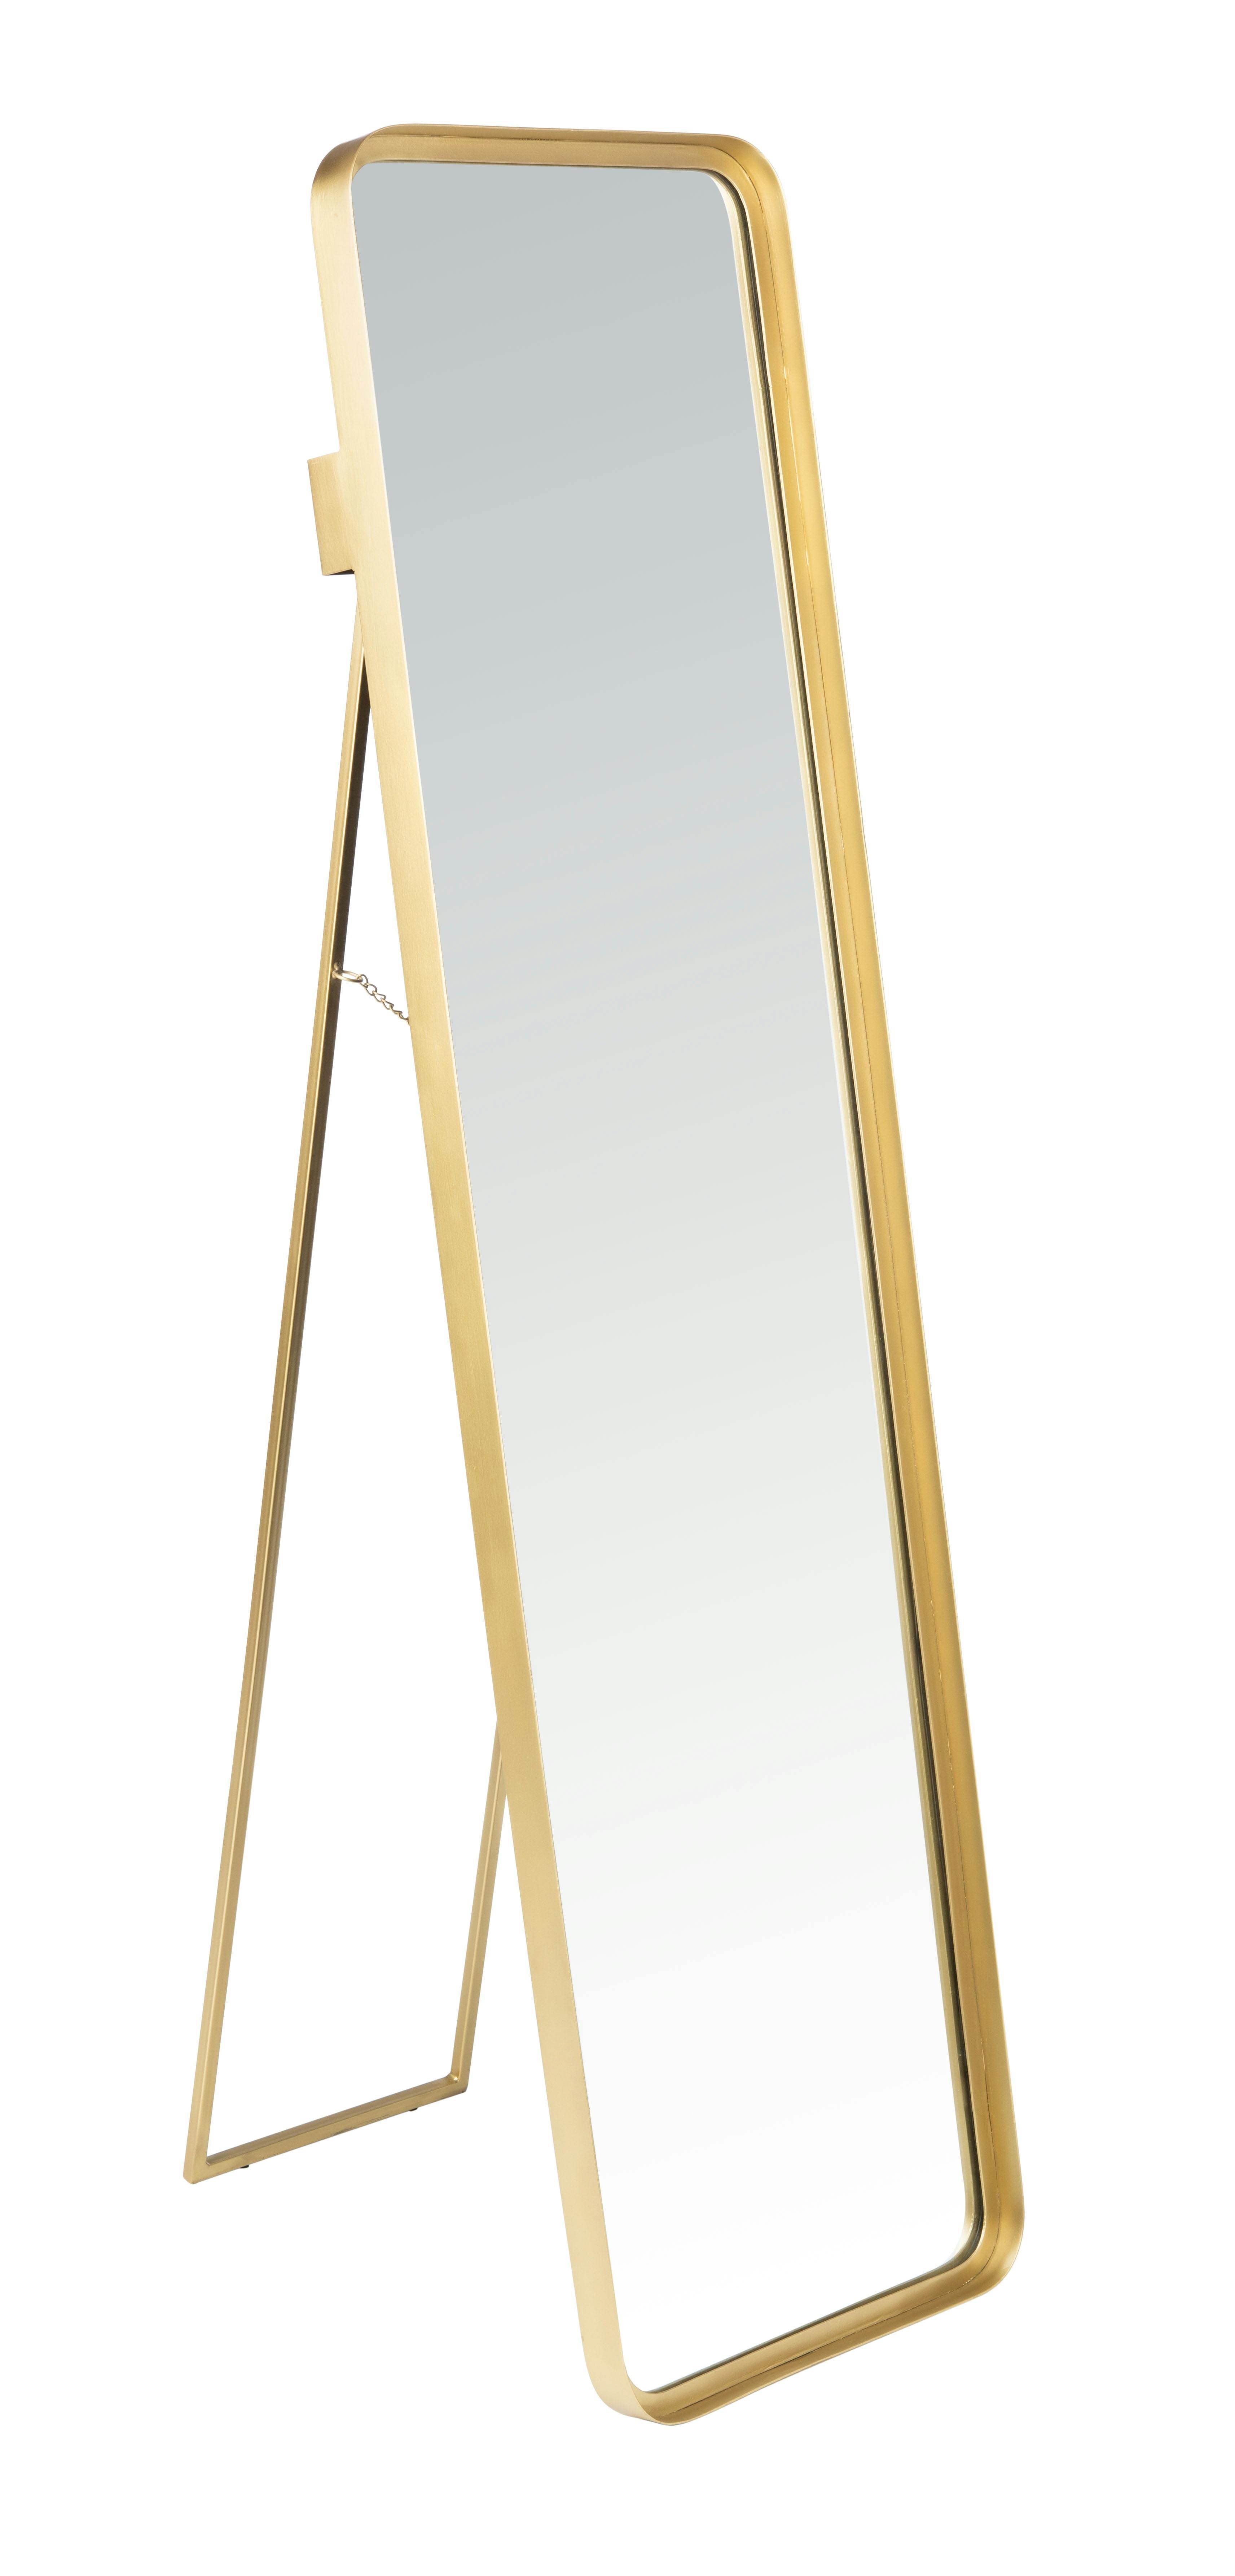 Contemporary Full-Length Wood Mirror in Brushed Gold